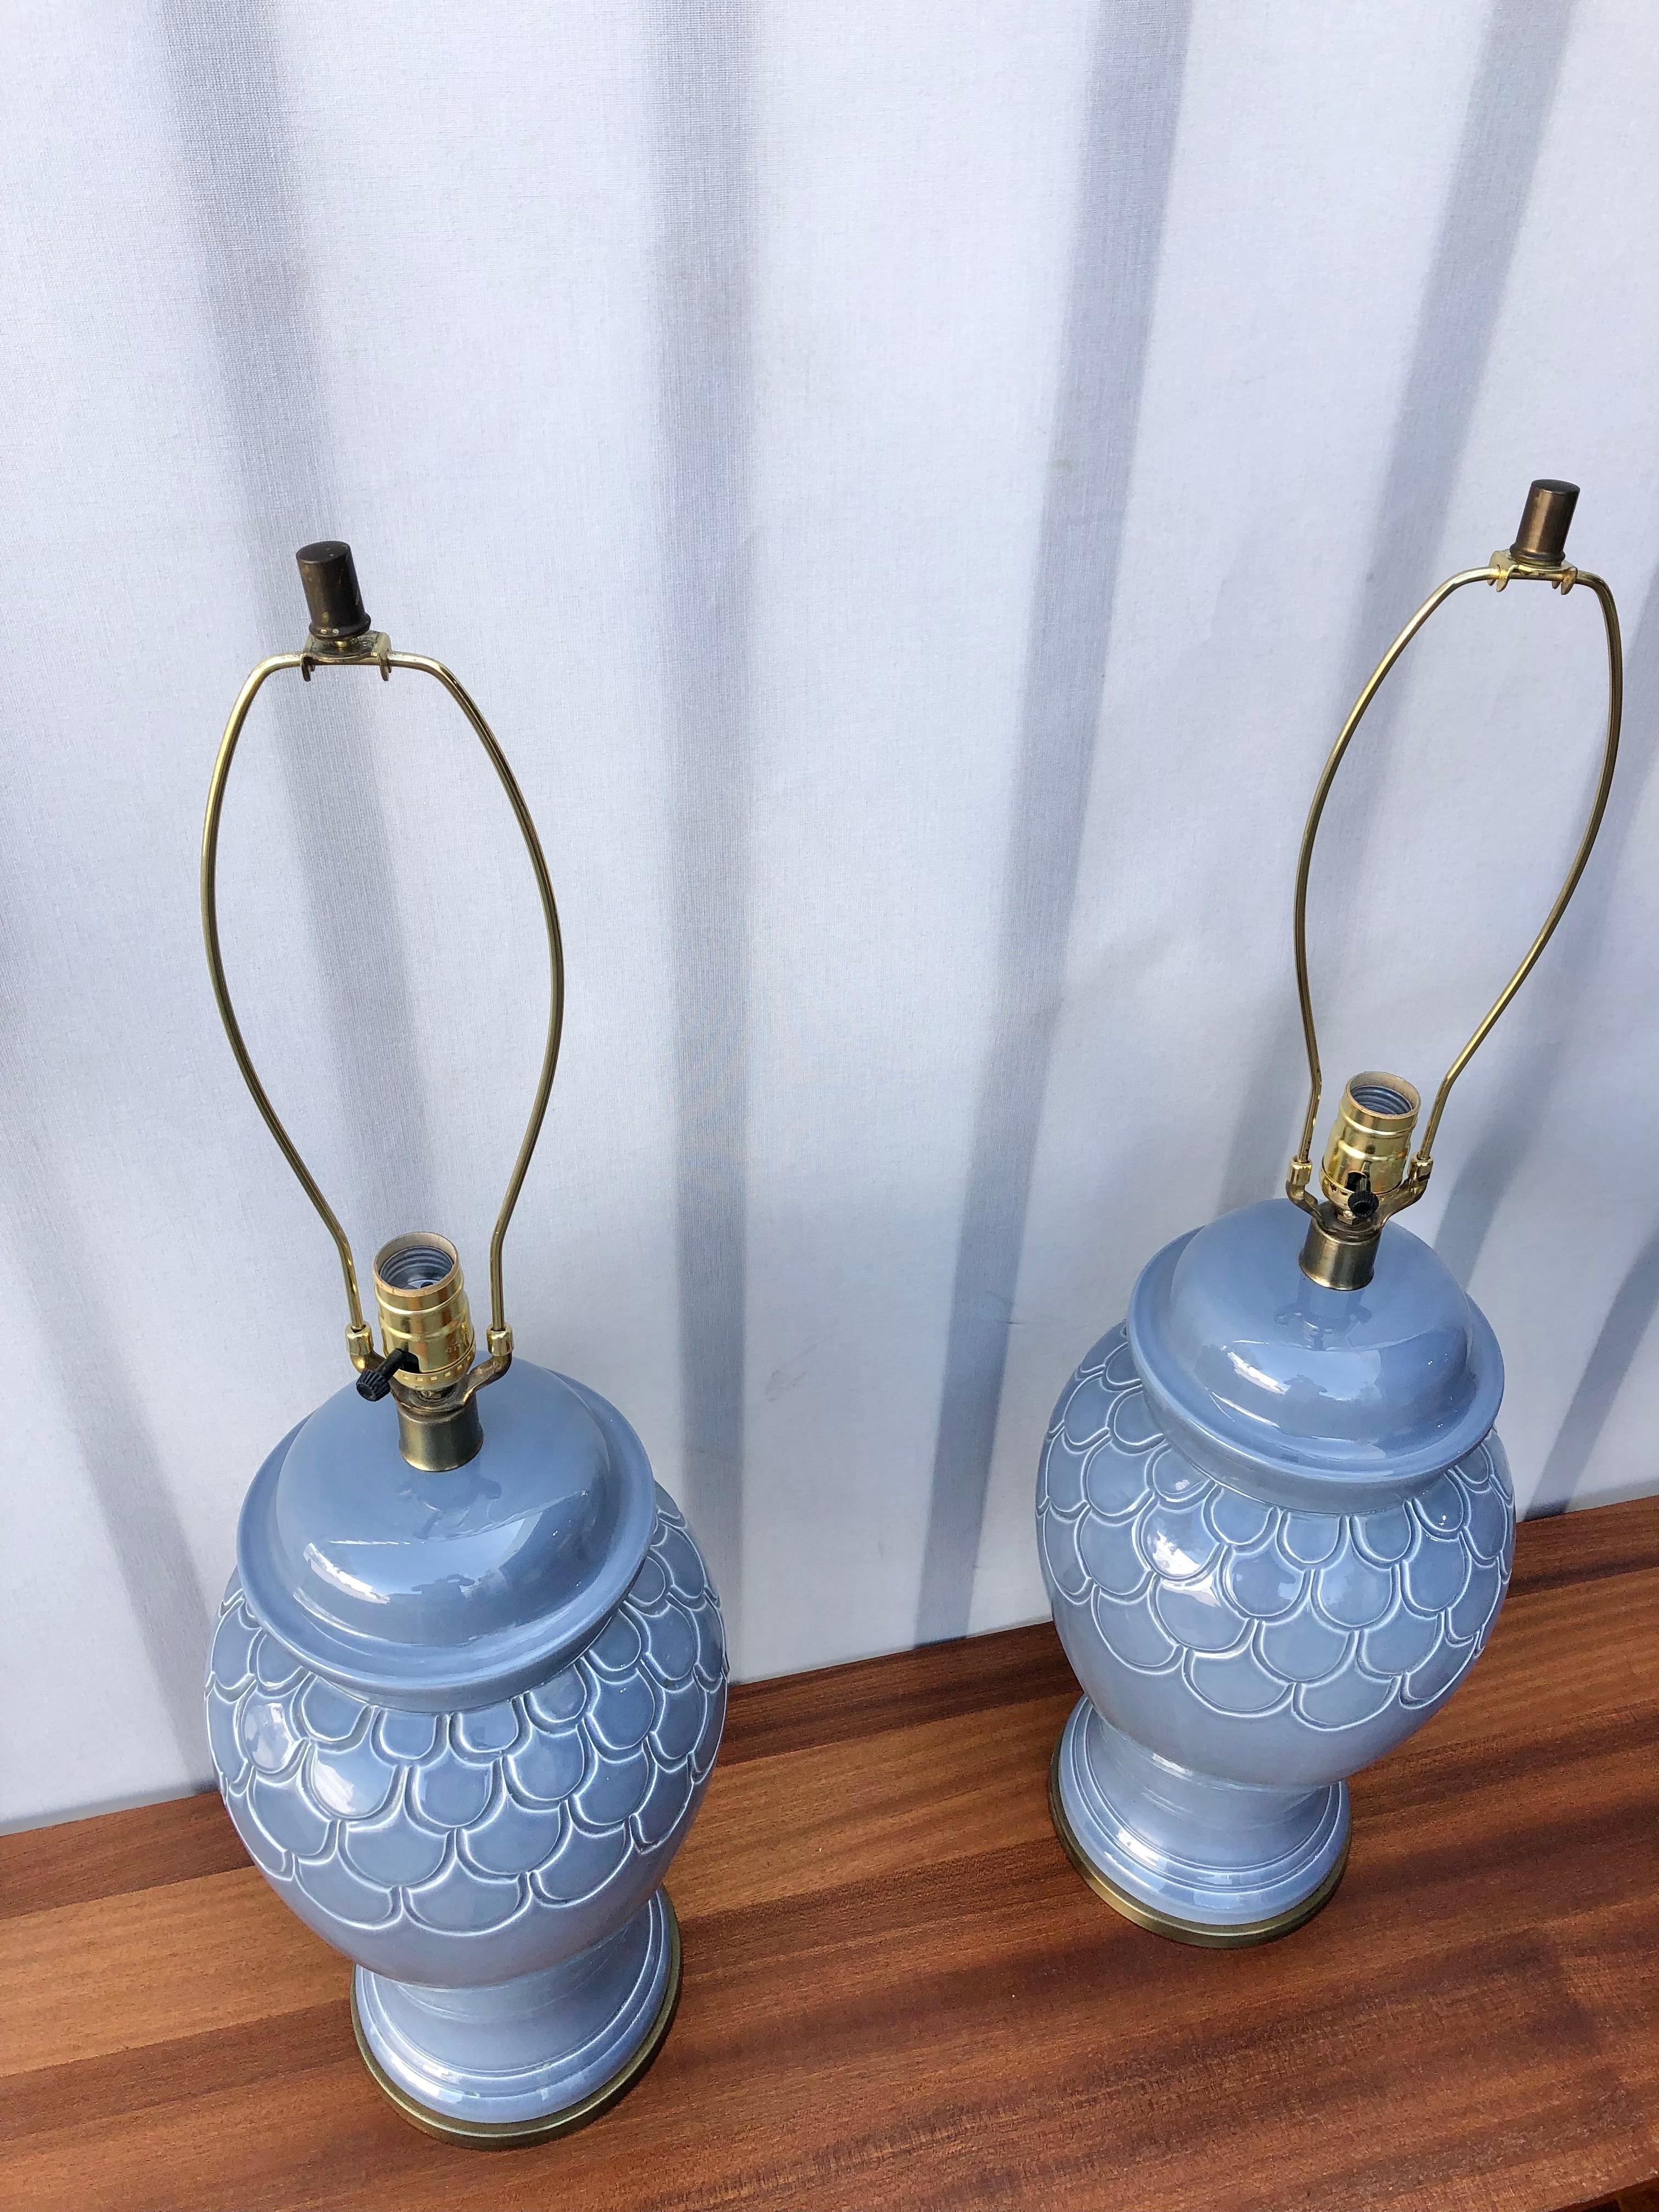 A Pair of Asian-Inspired Hollywood Regency Ginger Jar Ceramic Lamps. C 1960s  In Good Condition For Sale In Miami, FL